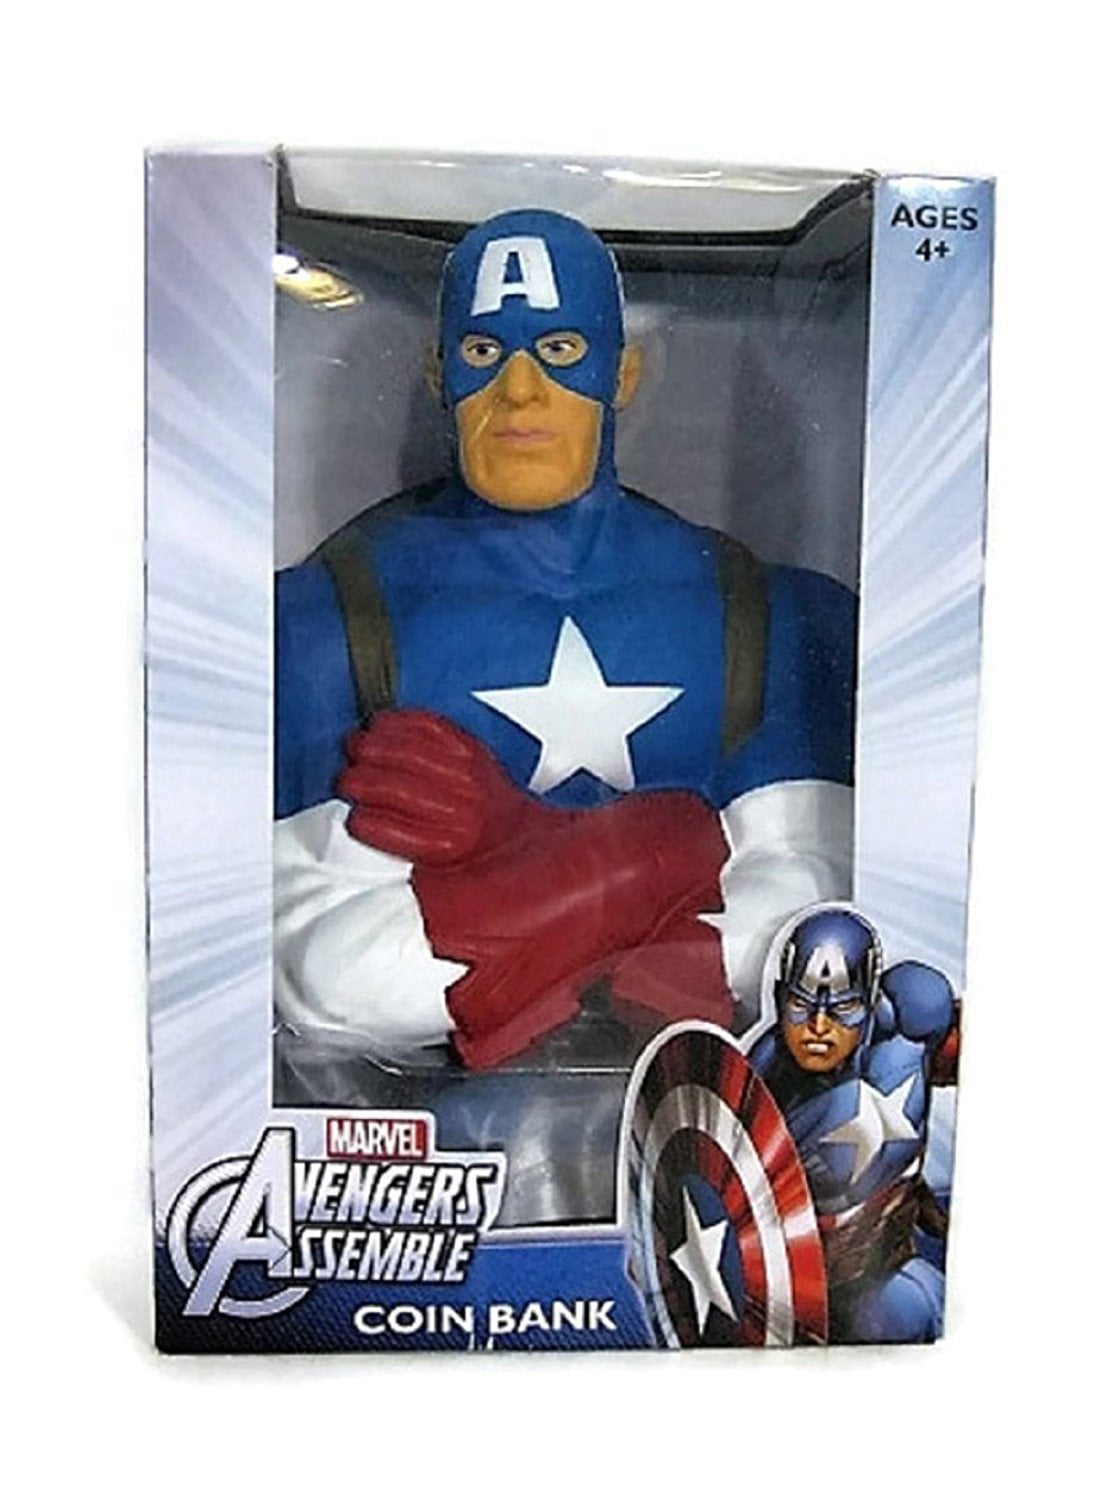 Marvel Avengers Assemble Coin Bank Captain America By